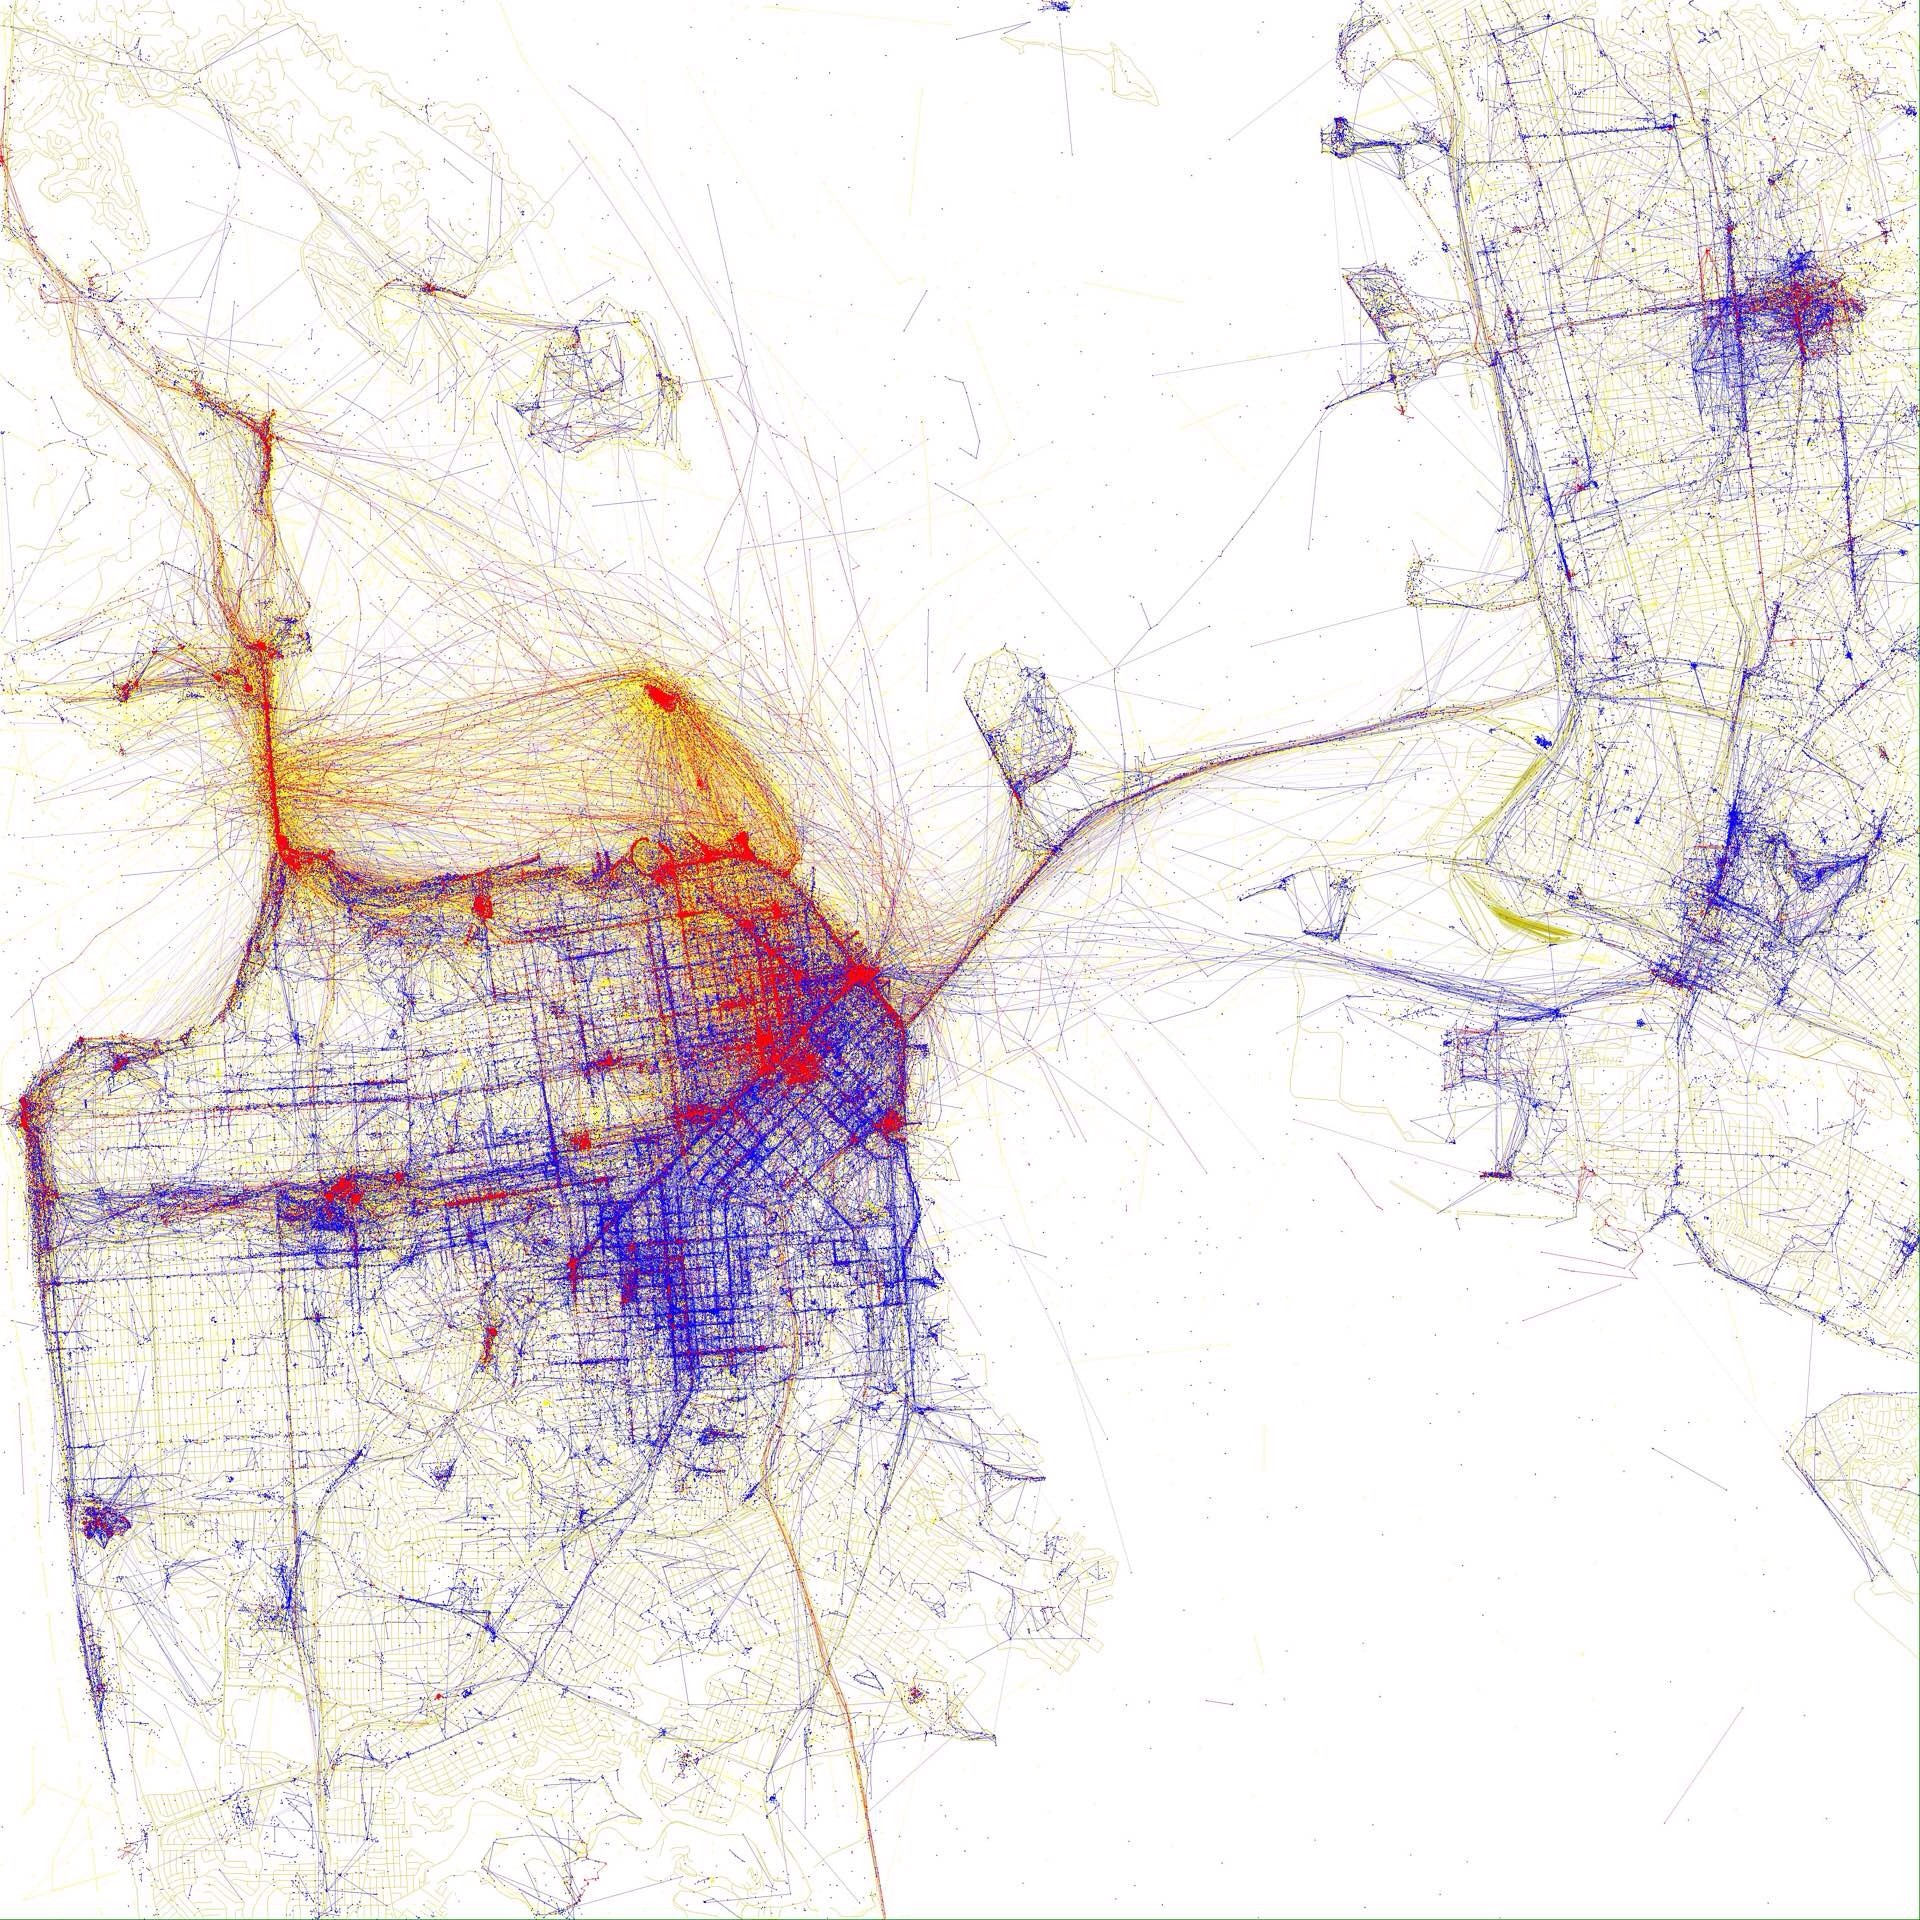 San Francisco, mapped by photography.